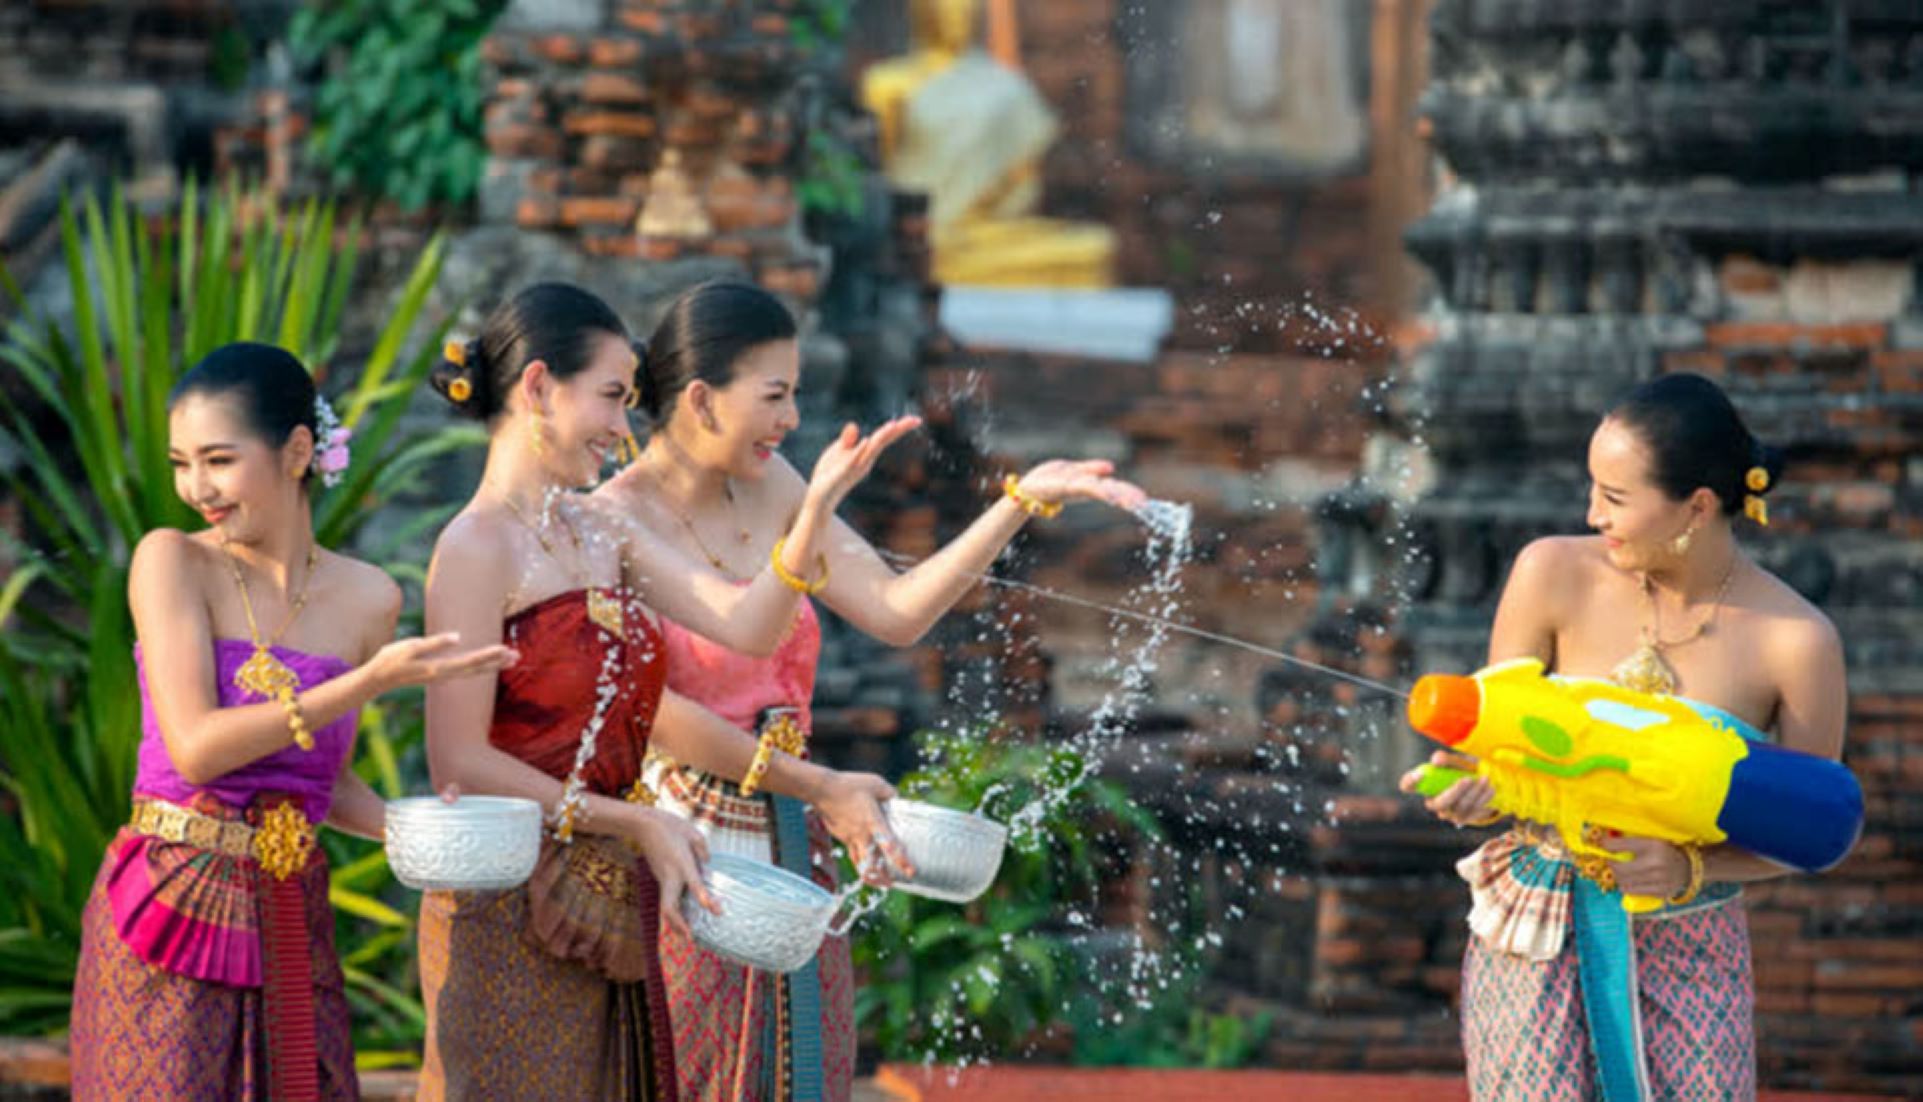 Thailand extends Songkran holiday with extra day to boost tourism